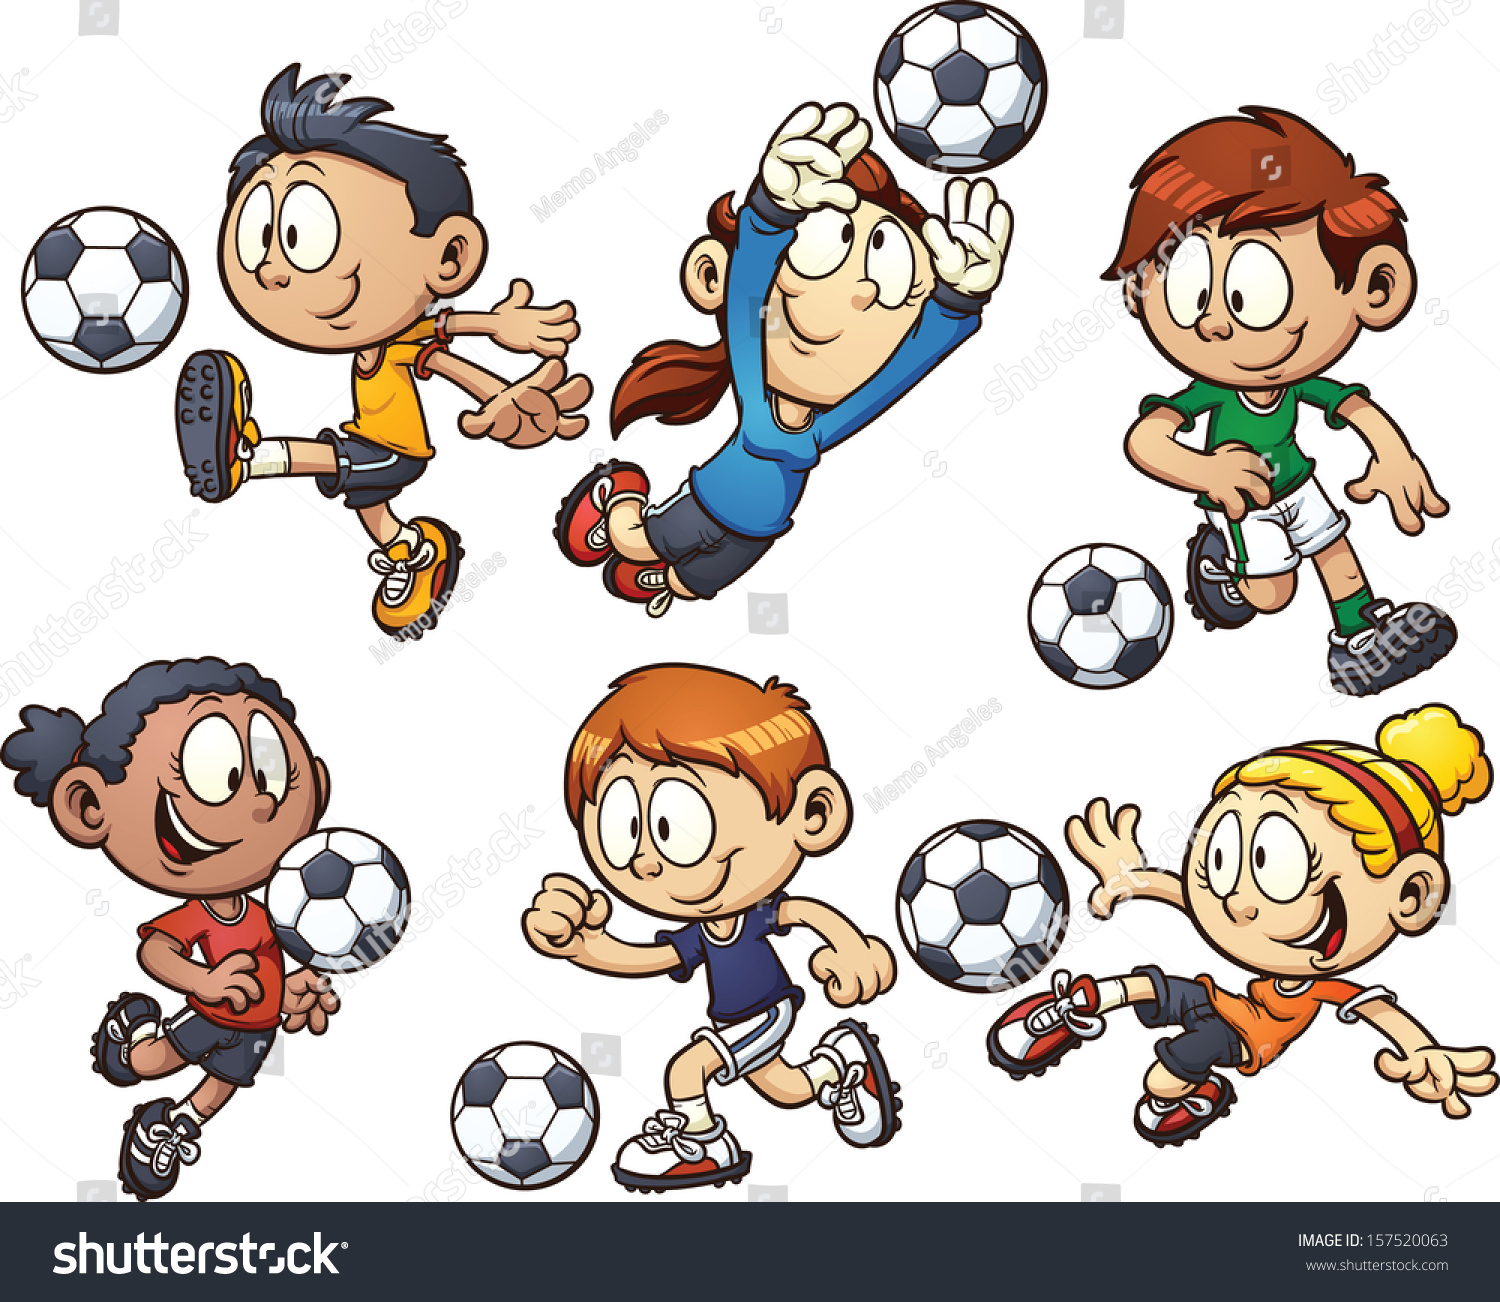 childrens clipart collection full download - photo #7